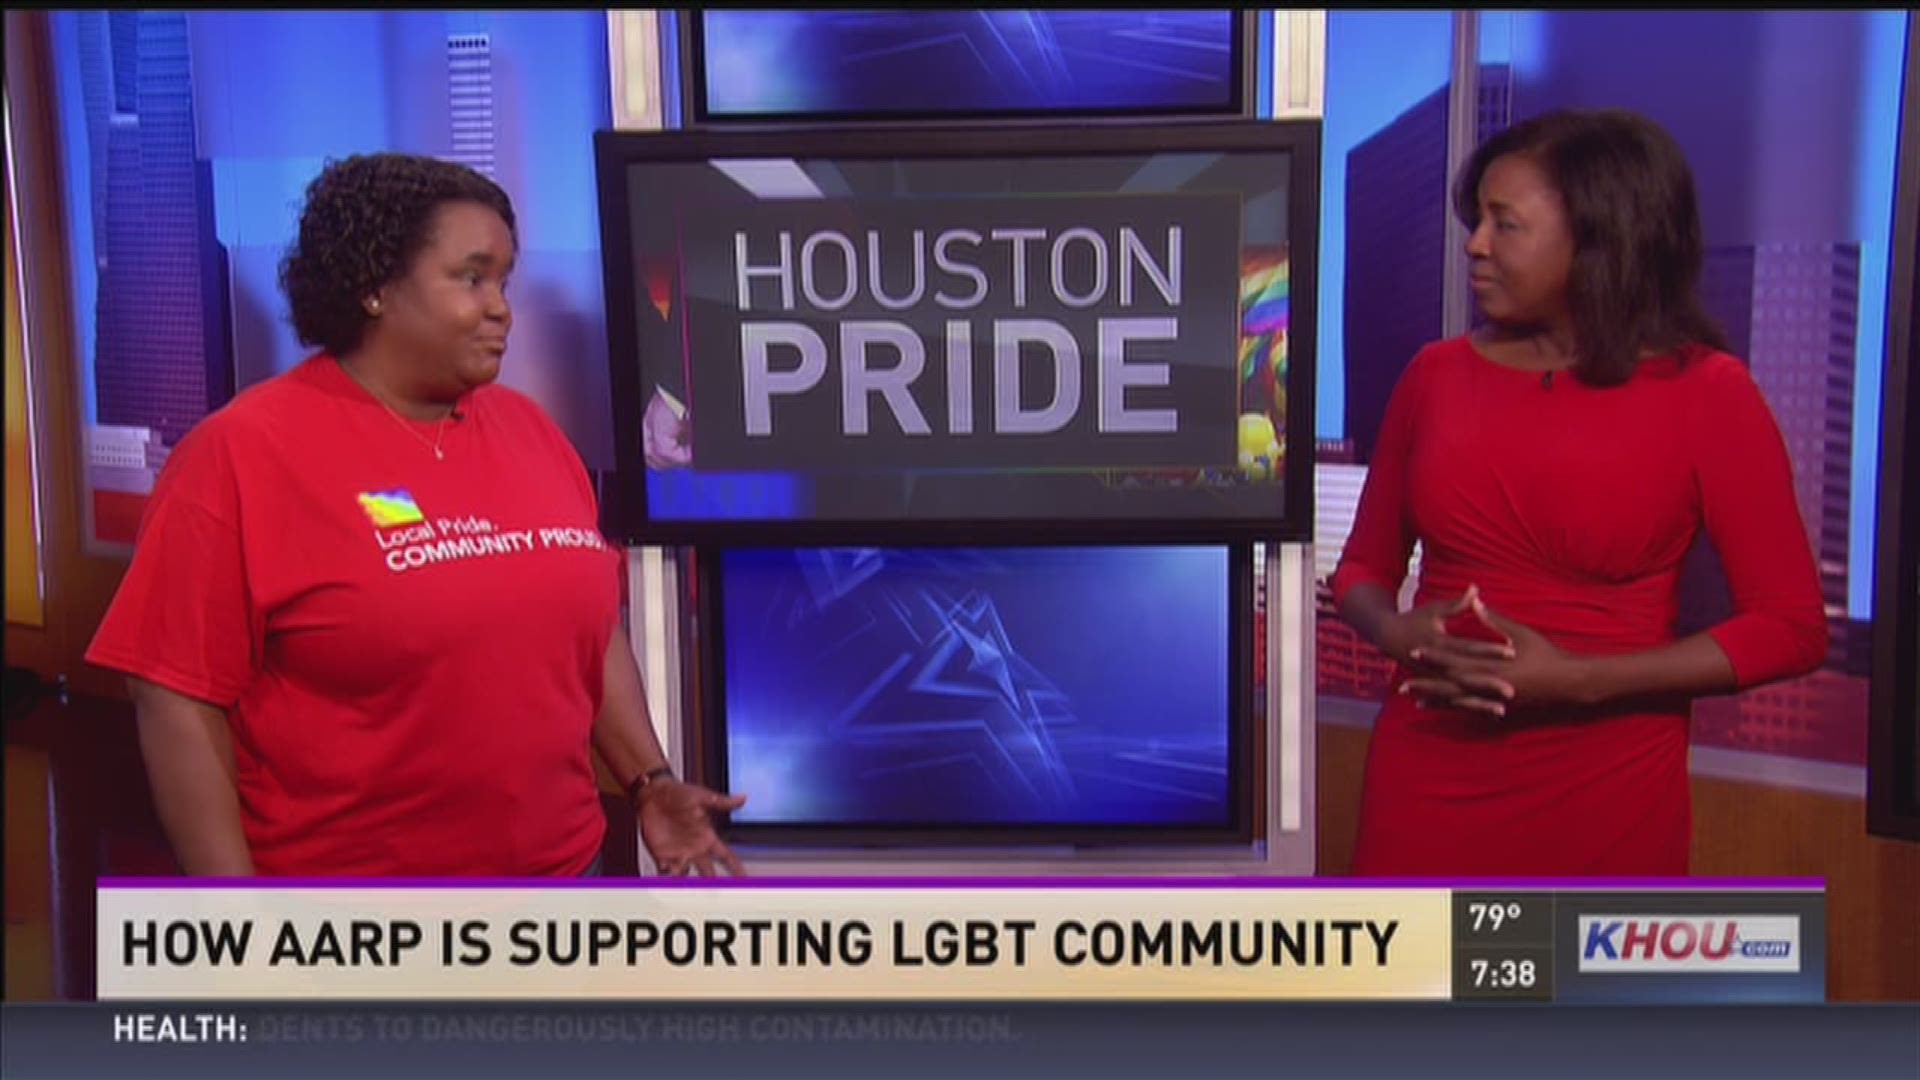 Shondra Wygal from AARP Houston shares how the organization is supporting the LGBT community.